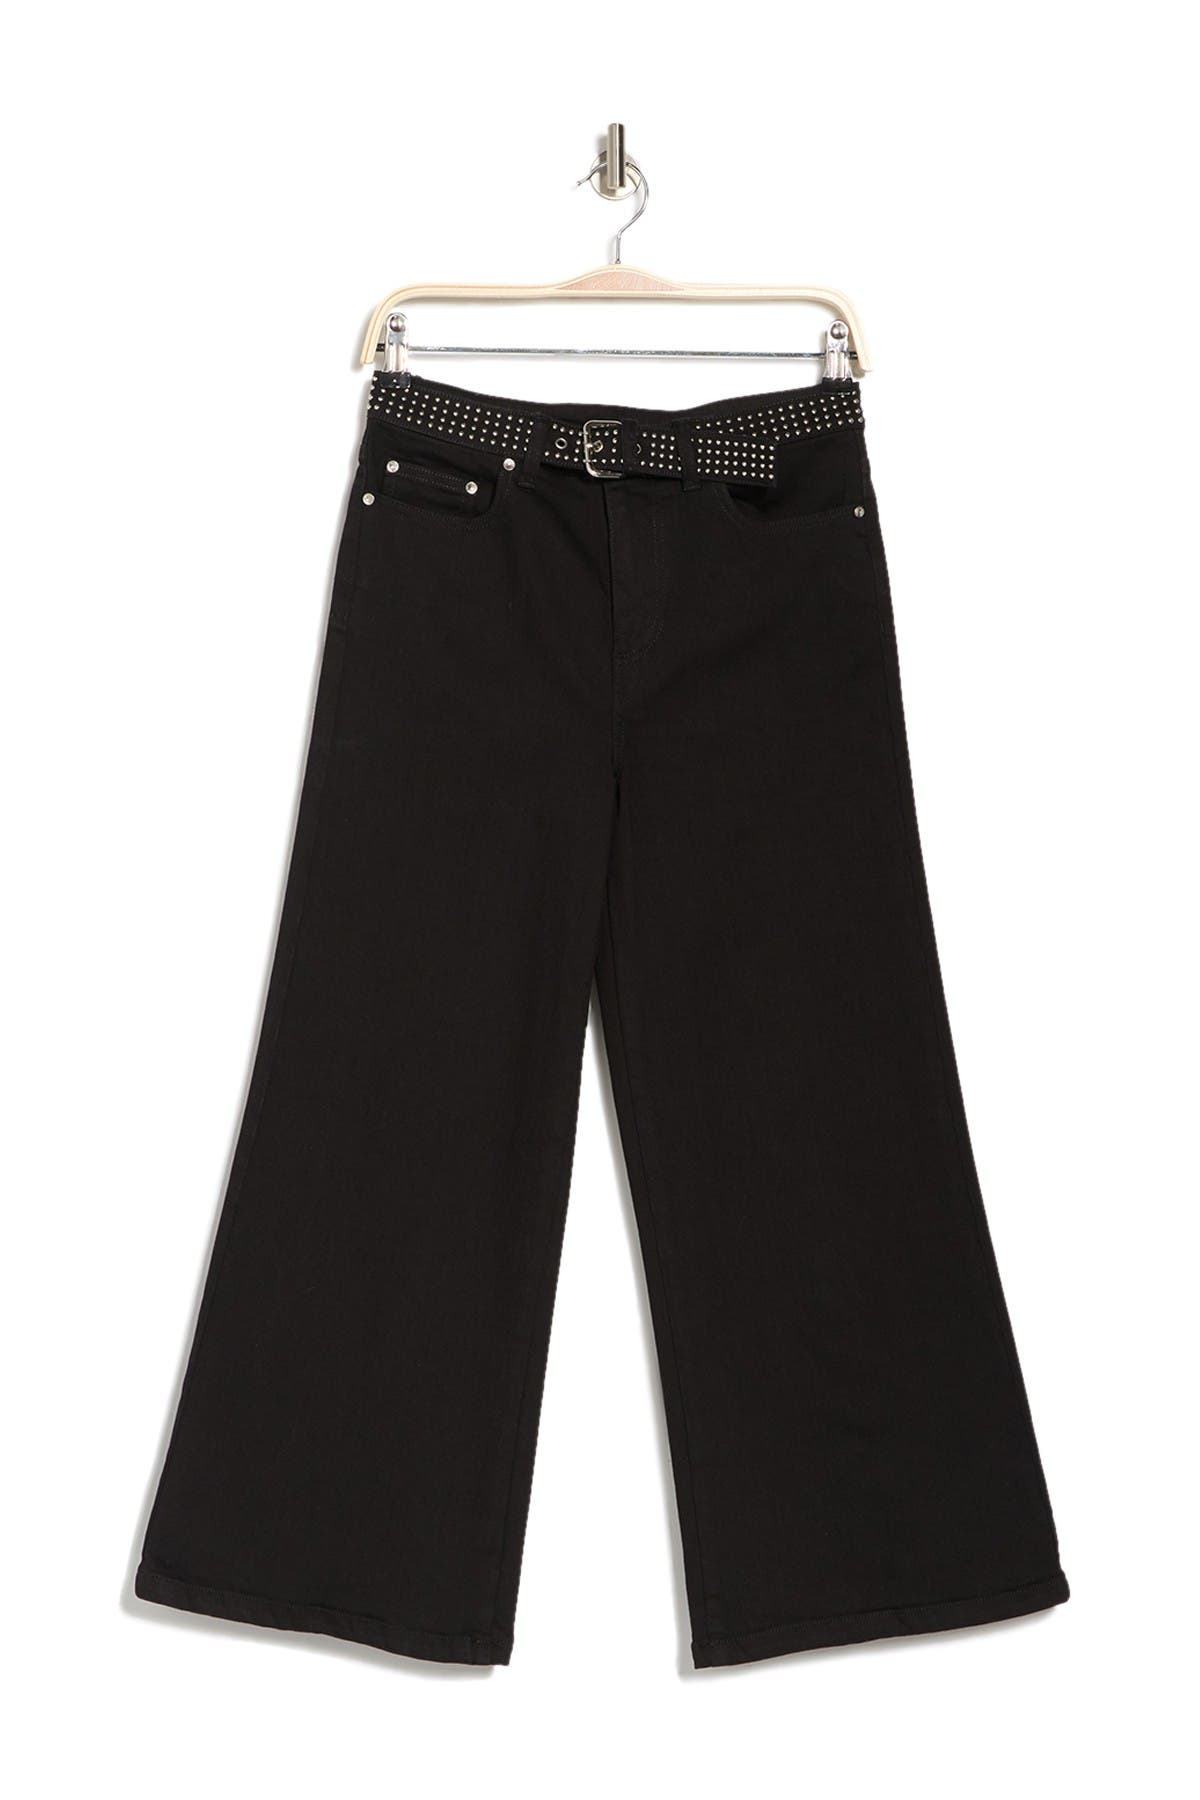 RED VALENTINO WIDE LEG JEANS,8054304253336